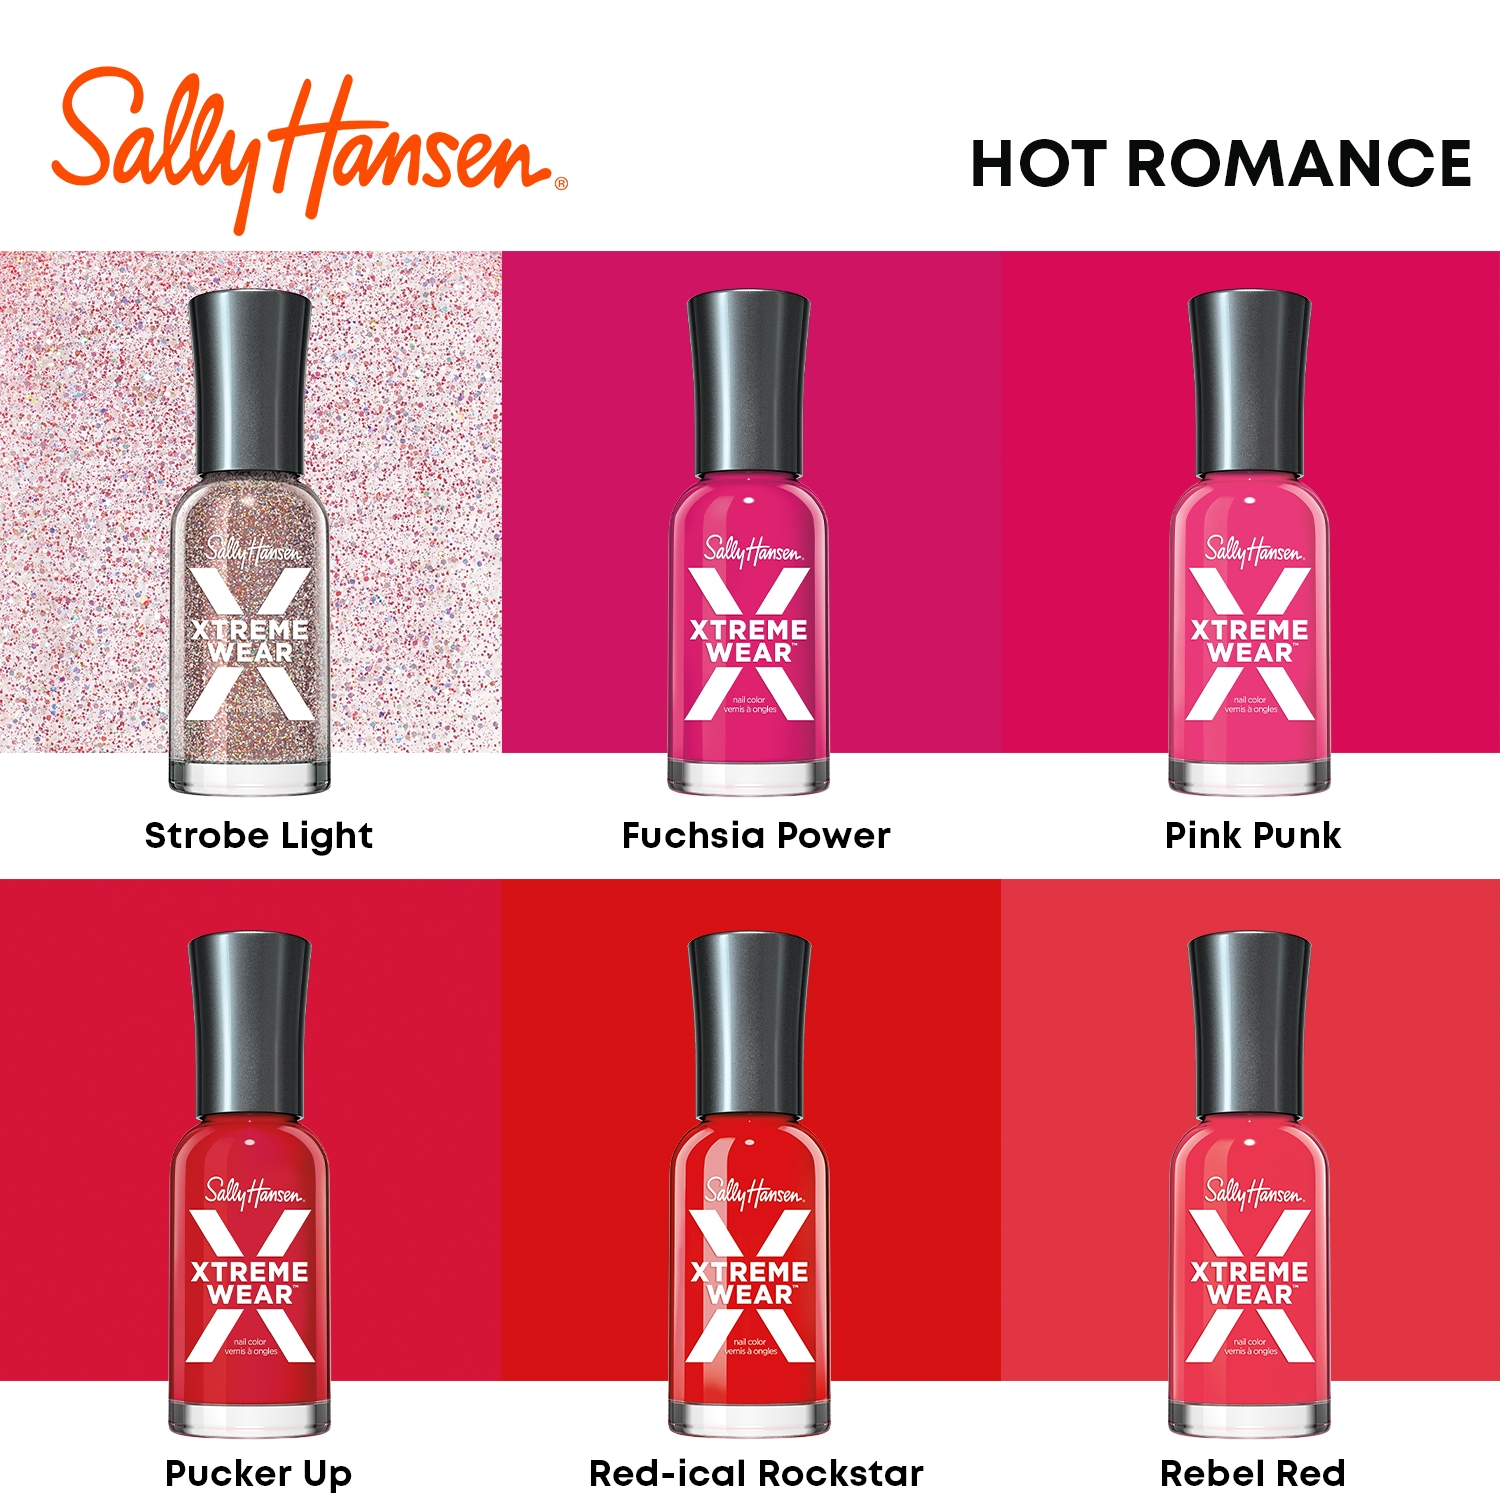 Sally Hansen Xtreme Wear Nail Polish, Pucker Up, 0.4 oz, Chip Resistant, Bold Color - image 8 of 14